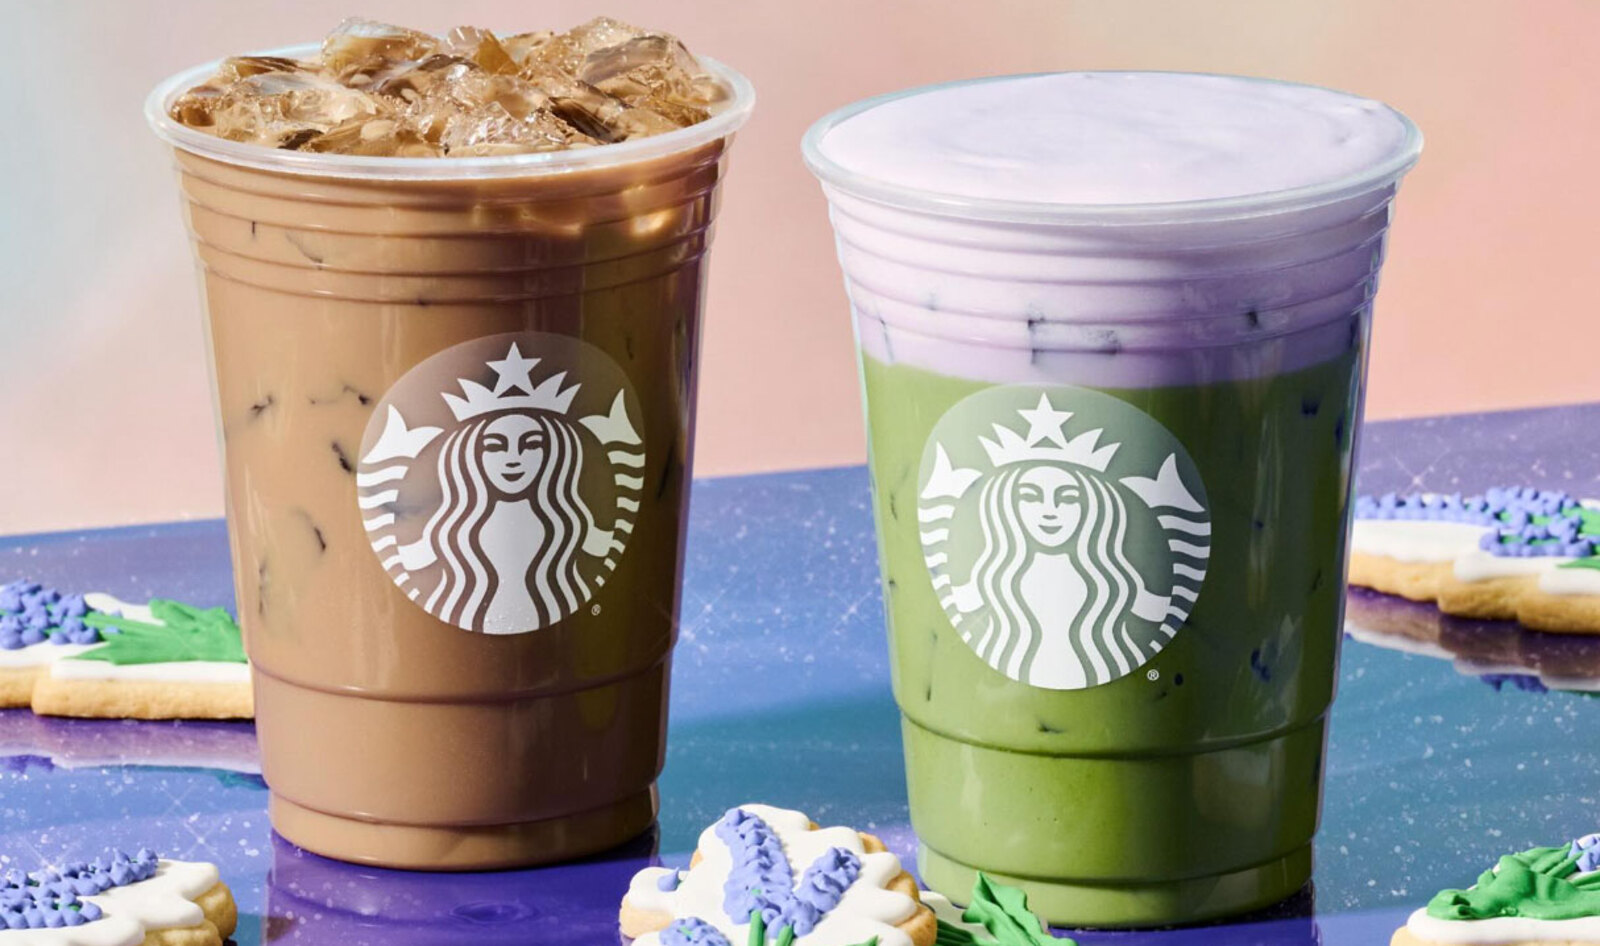 The new spring Starbucks drinks: Iced Oatmilk Lavender Latte and the Matcha with the Lavender Coldfoam.